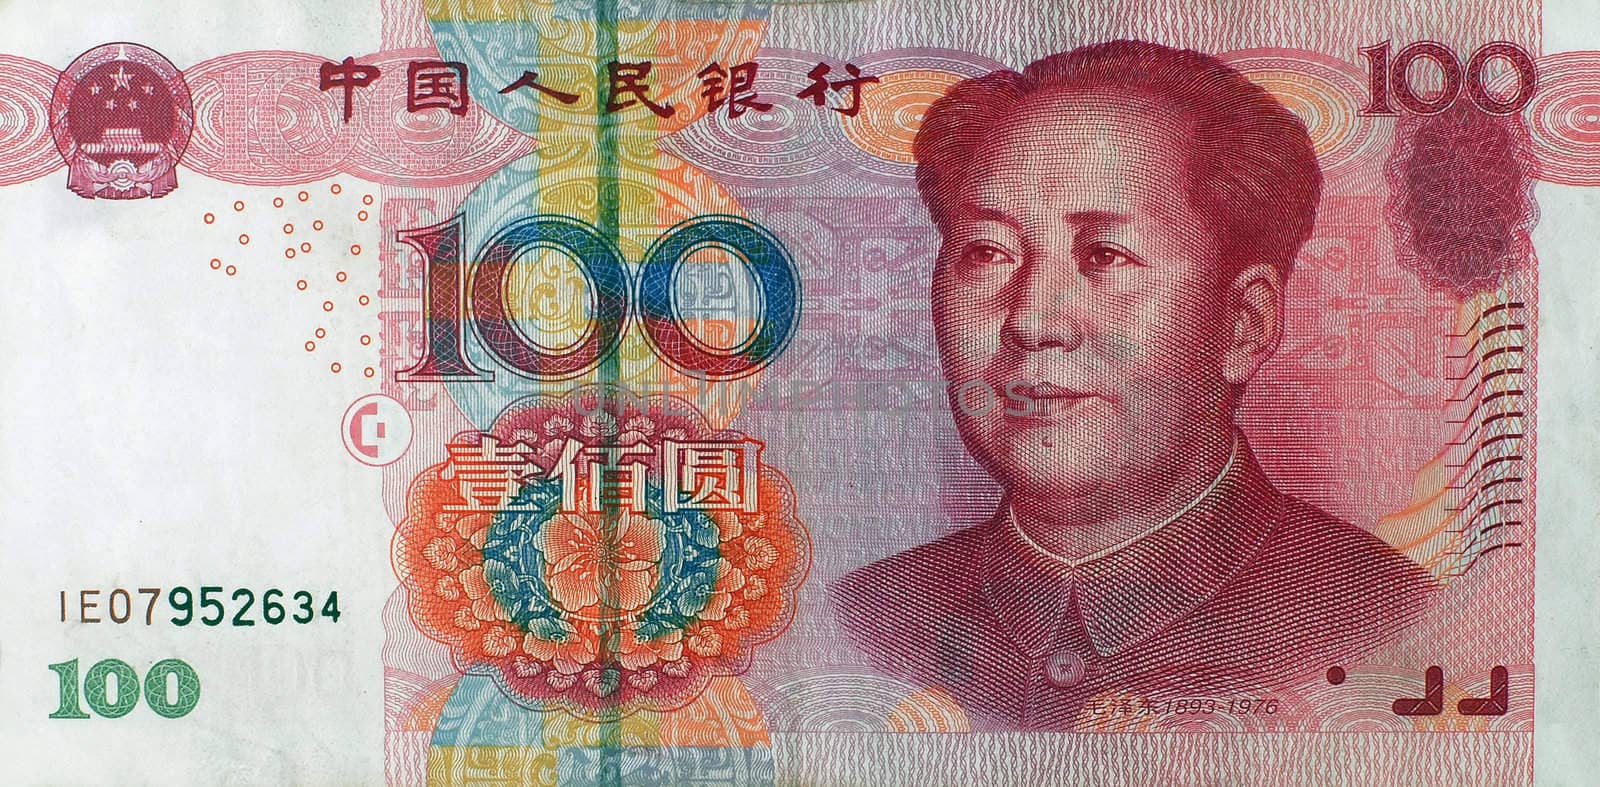 Chinese paper currency. Hundred Yuan banknote.